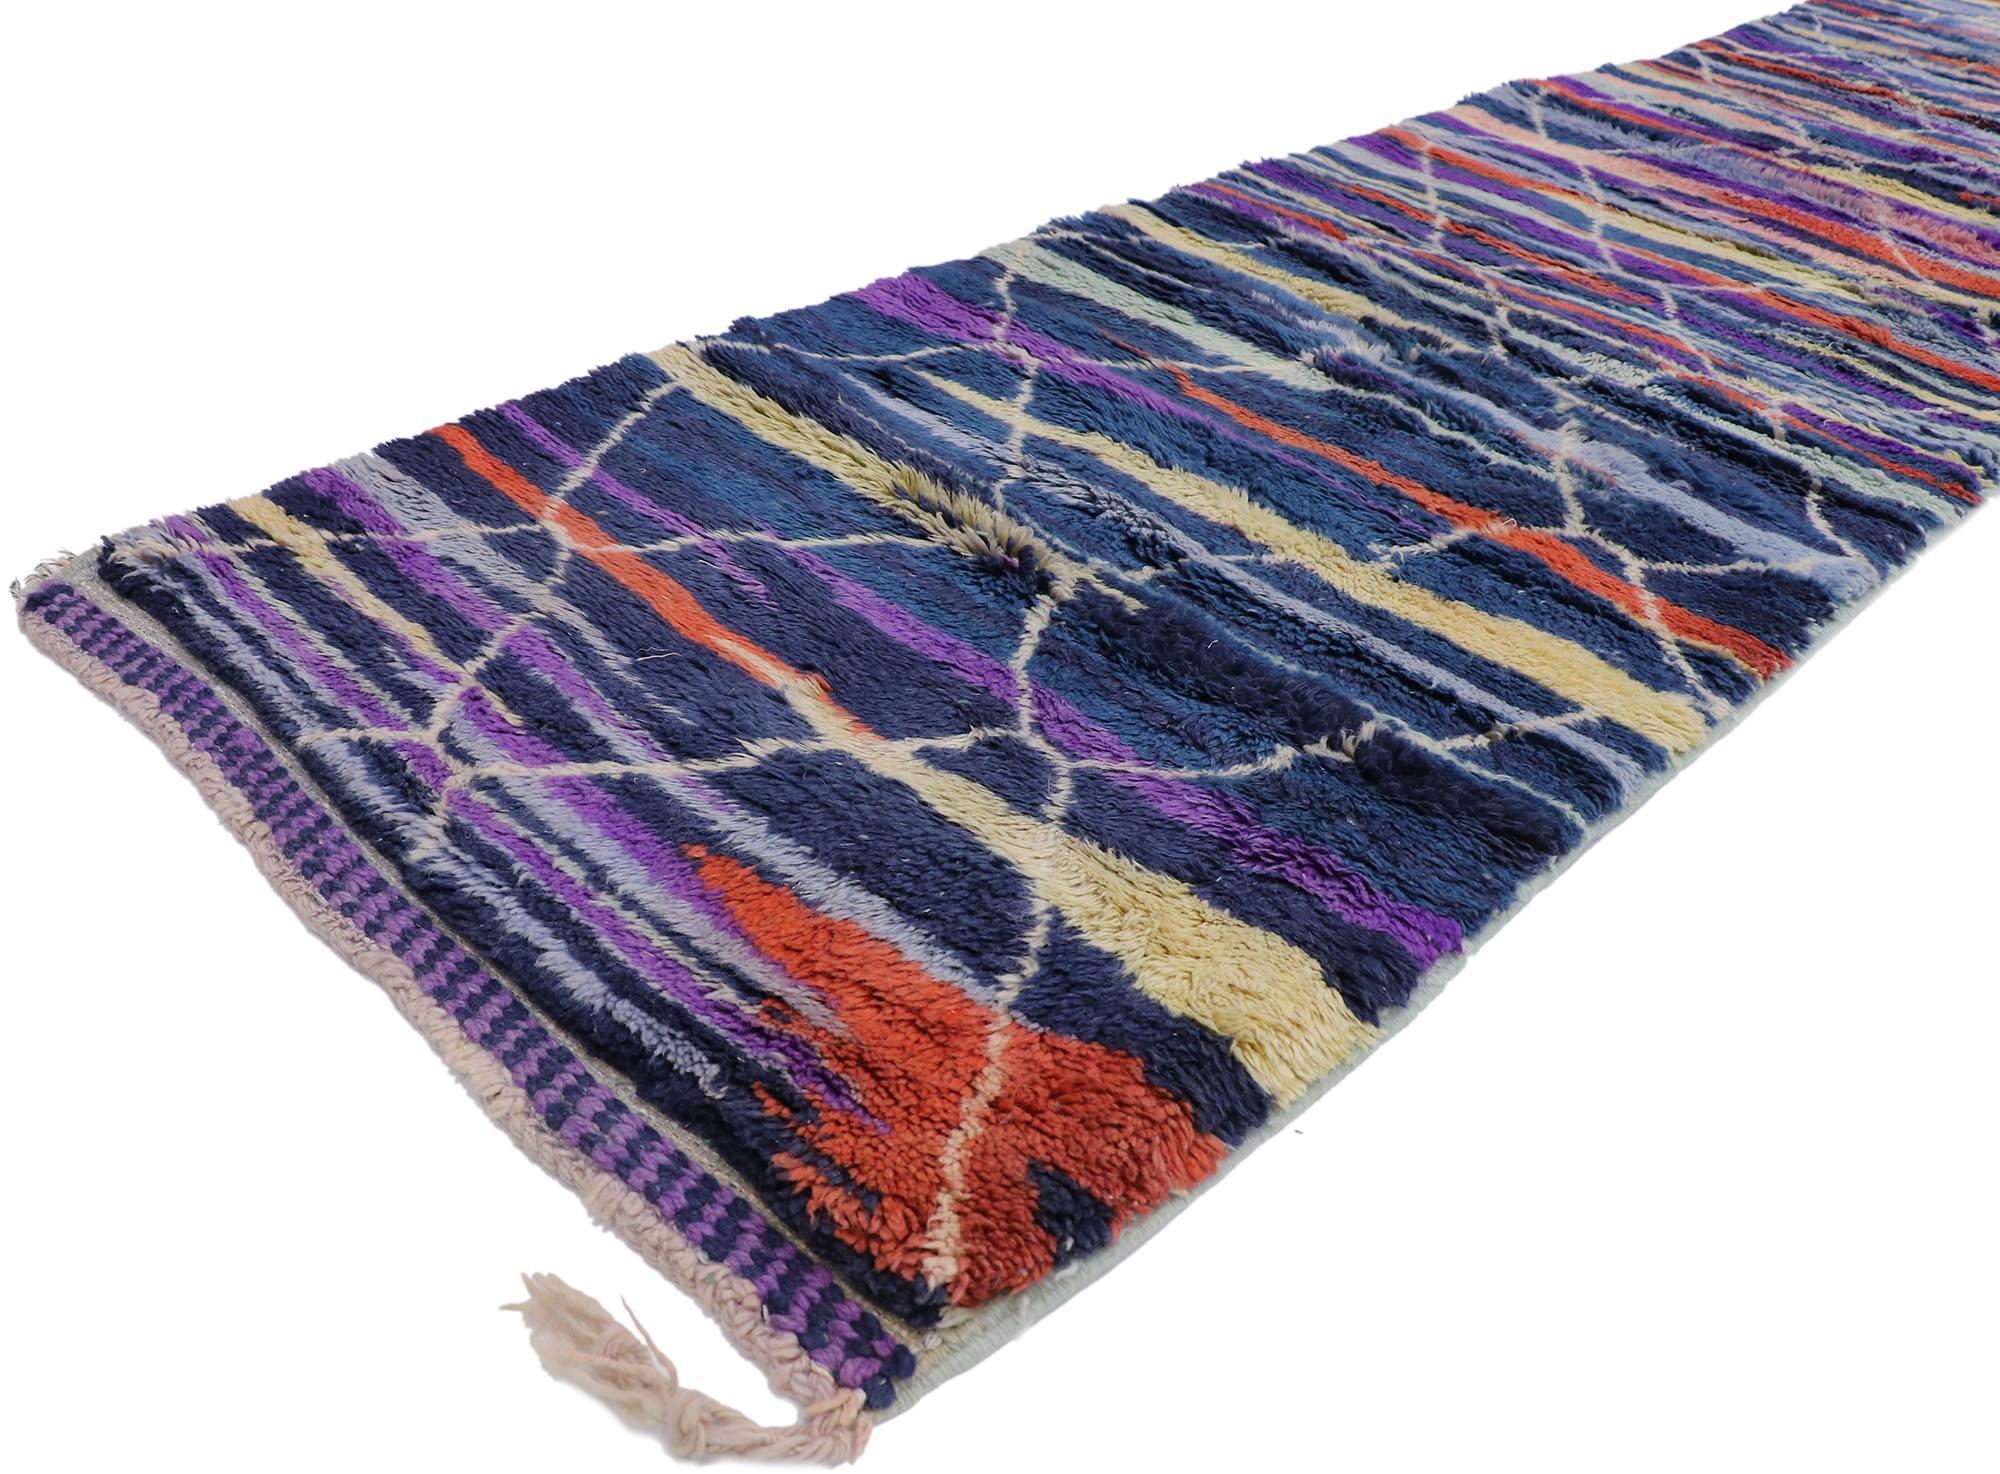 21092 New Contemporary Berber Moroccan runner inspired by Sol LeWitt 02'04 x 13'05. Showcasing a bold expressive design, incredible detail and texture, this hand knotted wool contemporary Berber Moroccan runner is a captivating vision of woven